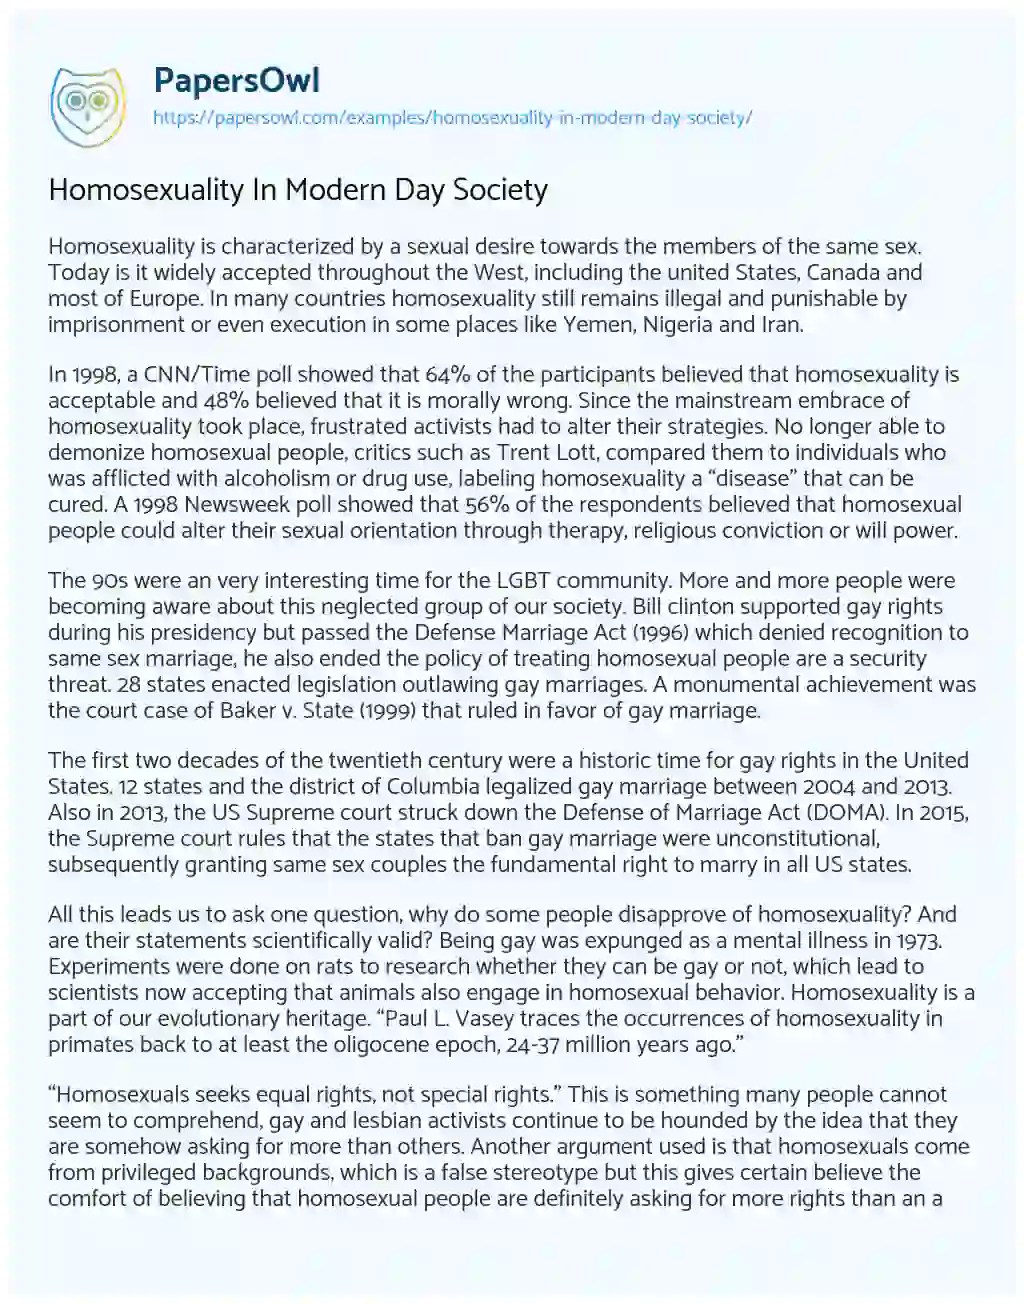 Homosexuality in Modern Day Society essay